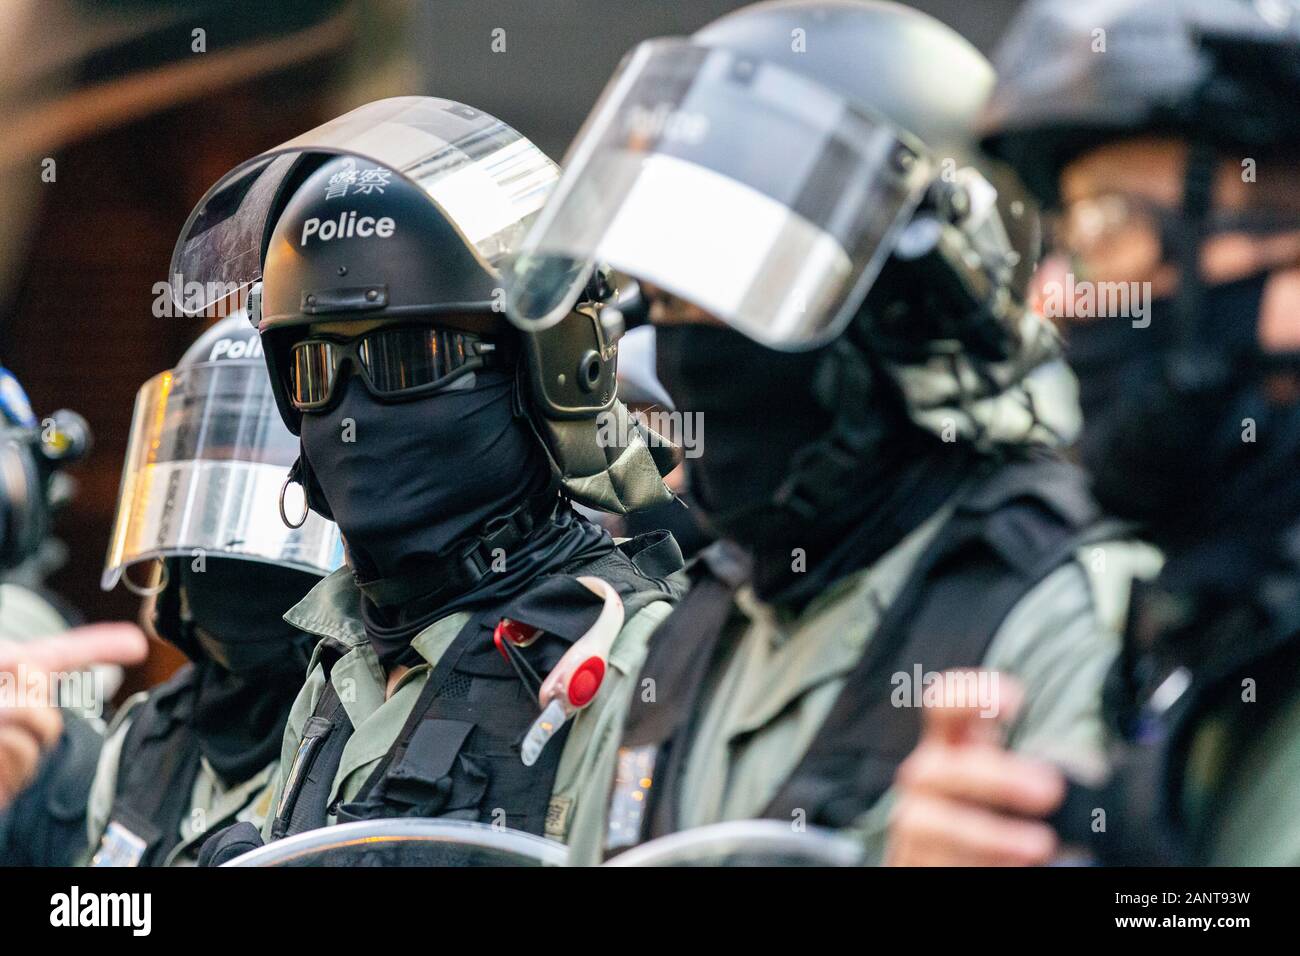 Hong Kong, China. 19th Jan, 2020. Police officers in full gear at the most recent Hong Kong Protest - Universal Seige on Communists Rally at Chater Garden, Central, Hong Kong. Credit: David Ogg/Alamy Live News Stock Photo